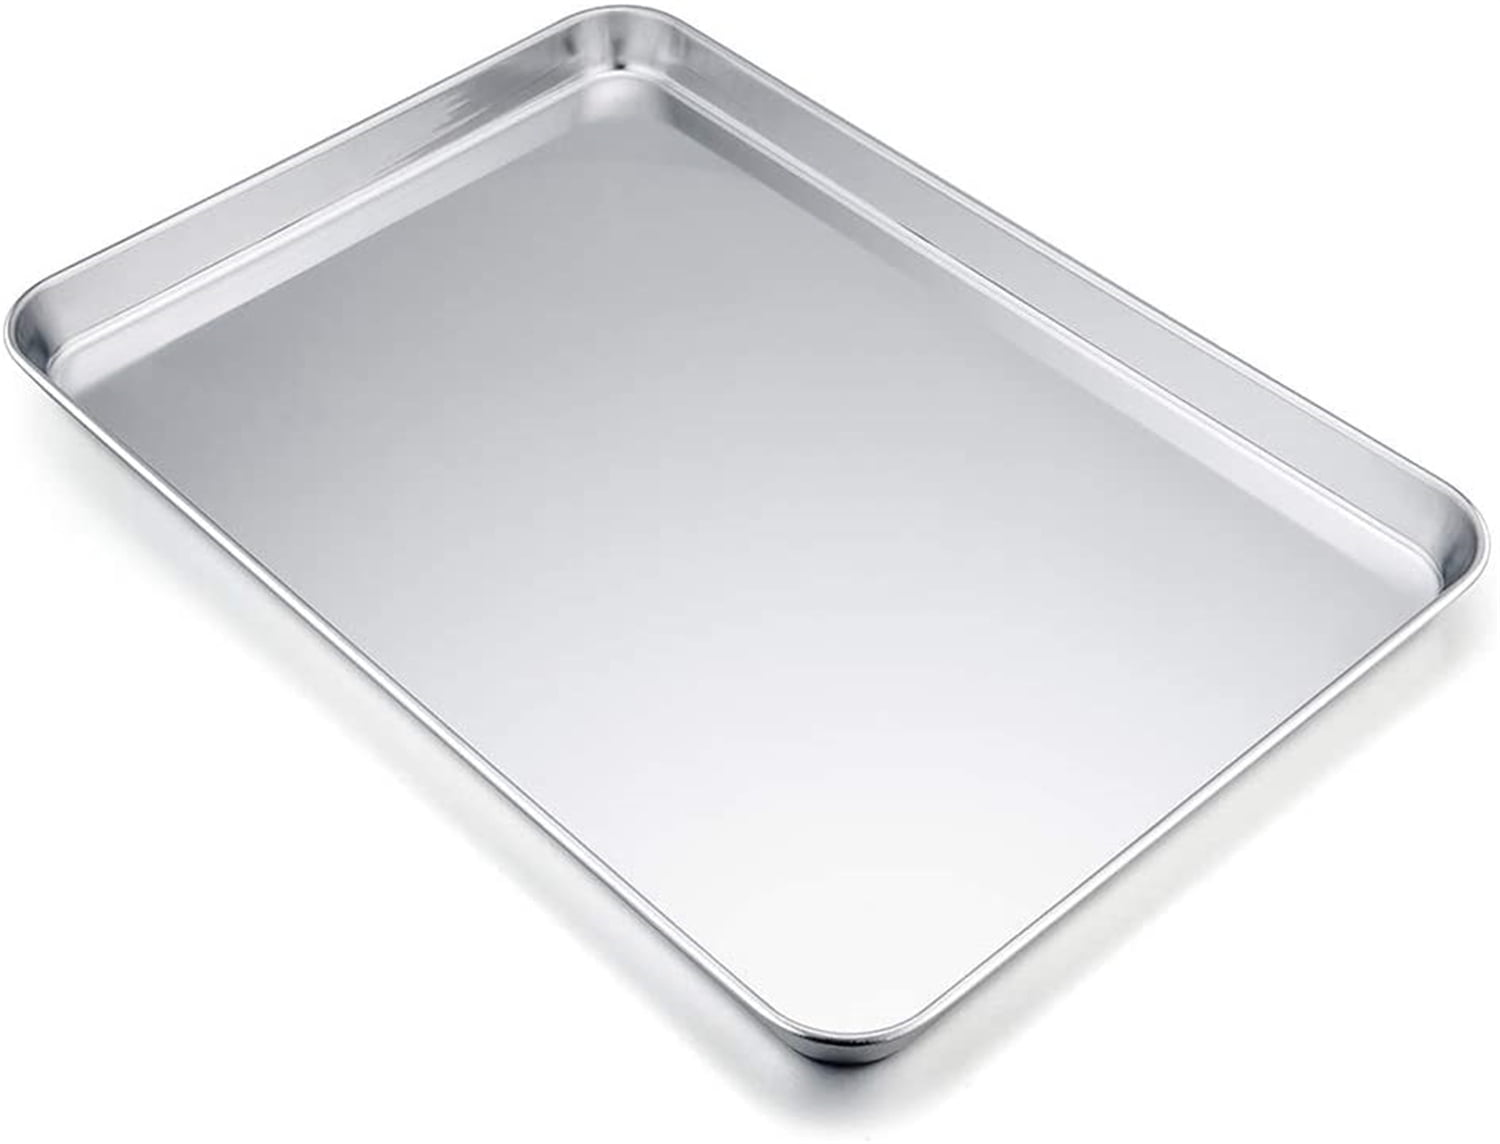 Baking Tray Set of 1, Stainless Steel Oven Tray– Large Cookie Sheet Pan for  Baking Cooking Serving - 26 x 20 x 2.5 cm, Healthy & Non Toxic, Easy Clean  & Dishwasher Safe 